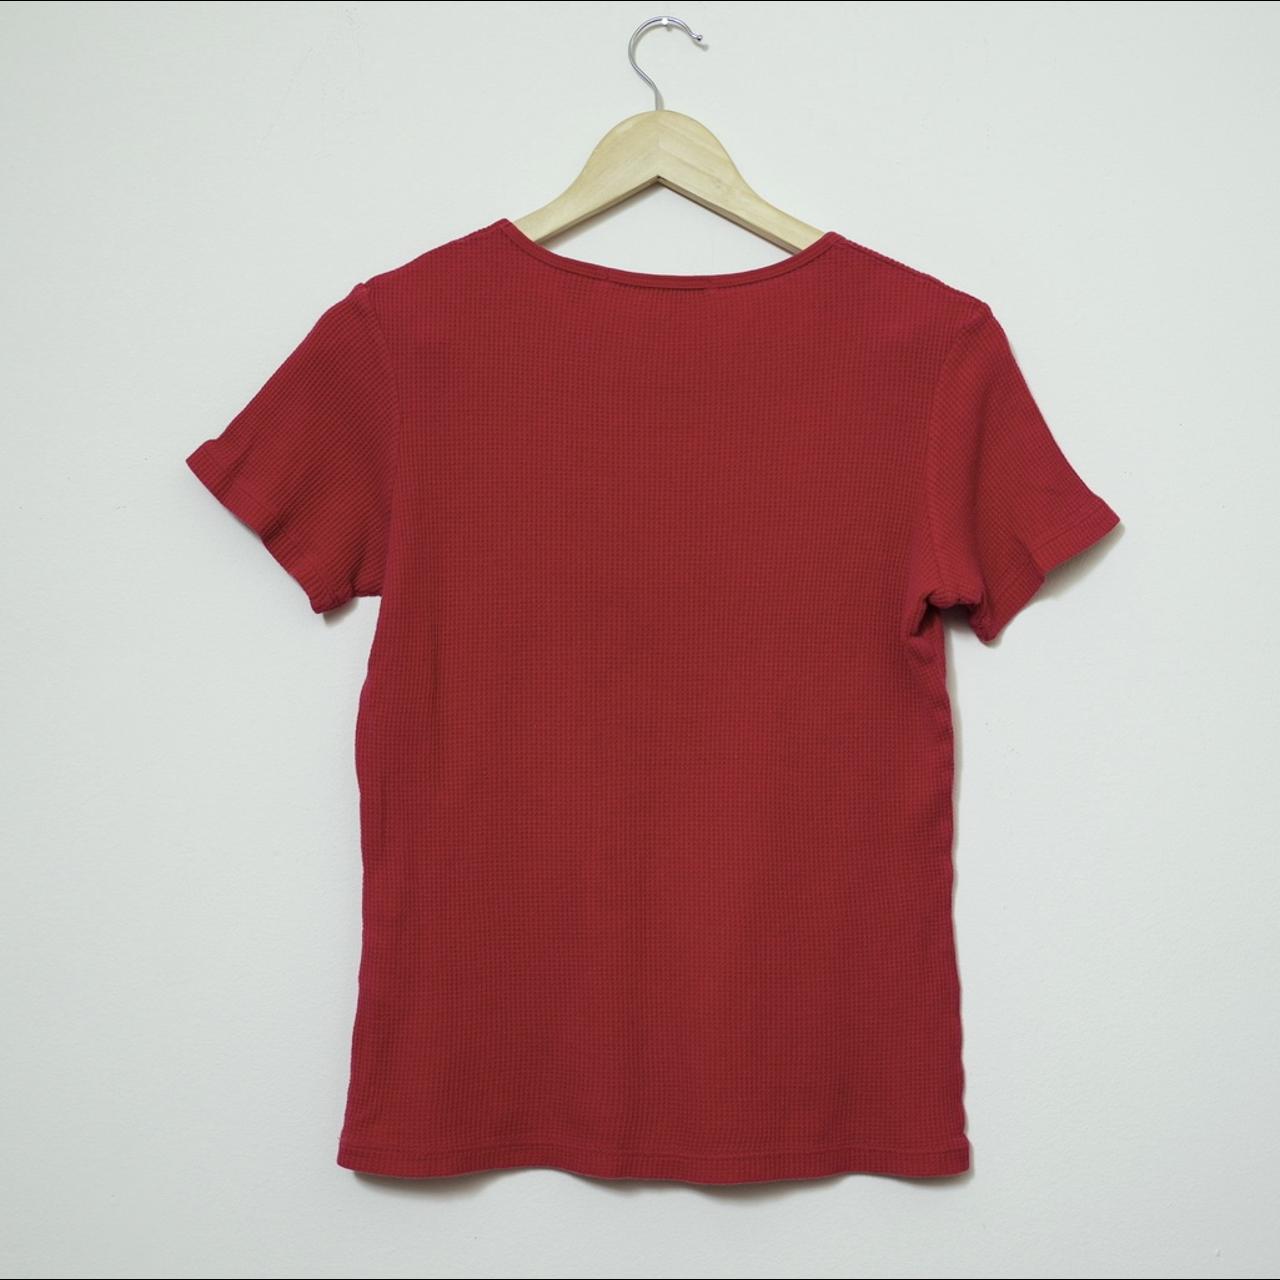 Tommy Hilfiger Women's Red and White T-shirt (4)